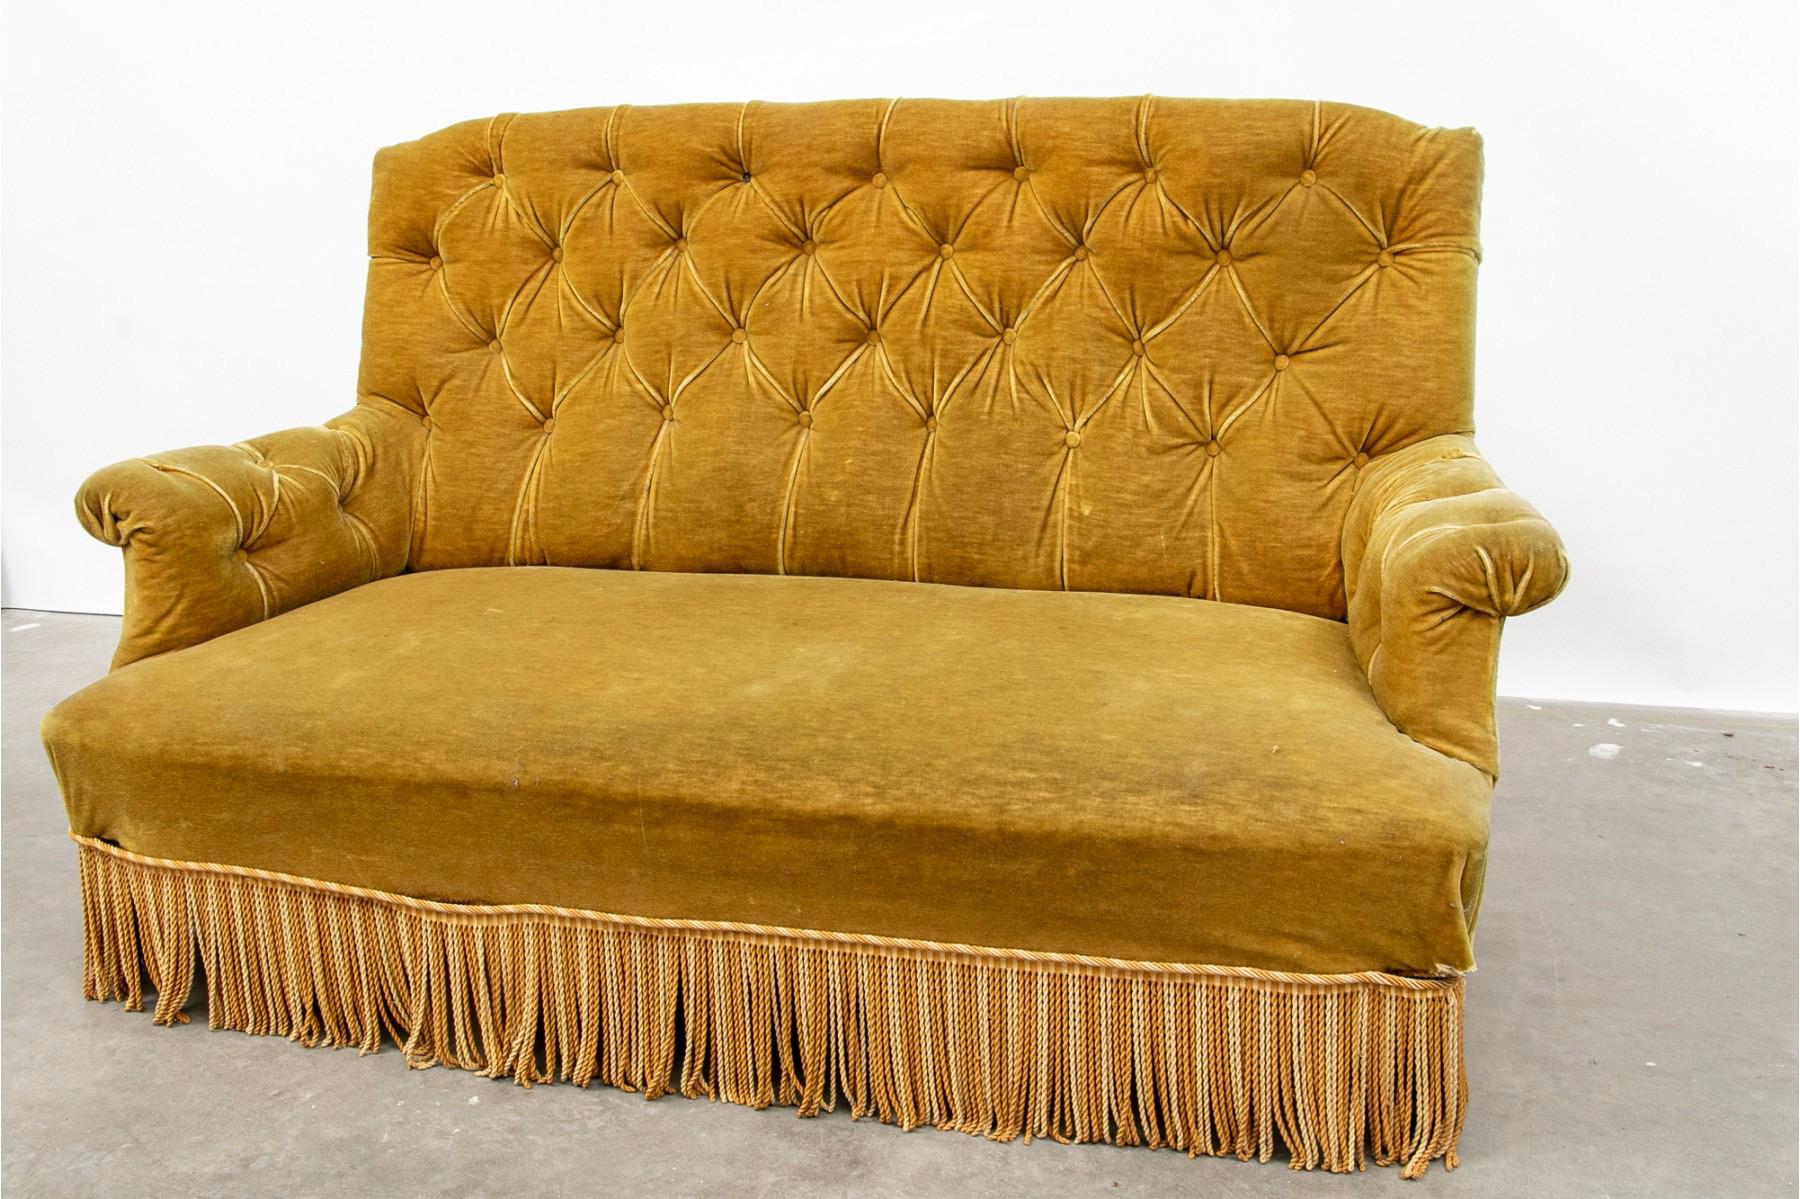 A Napoleon III settee with tufted back and arms, The sofa is upholstered in gold velvet with matching contrasting bouillon fringe and resting on turned legs.

The sofa is in good vintage condition, but the upholstery does show signs of wear